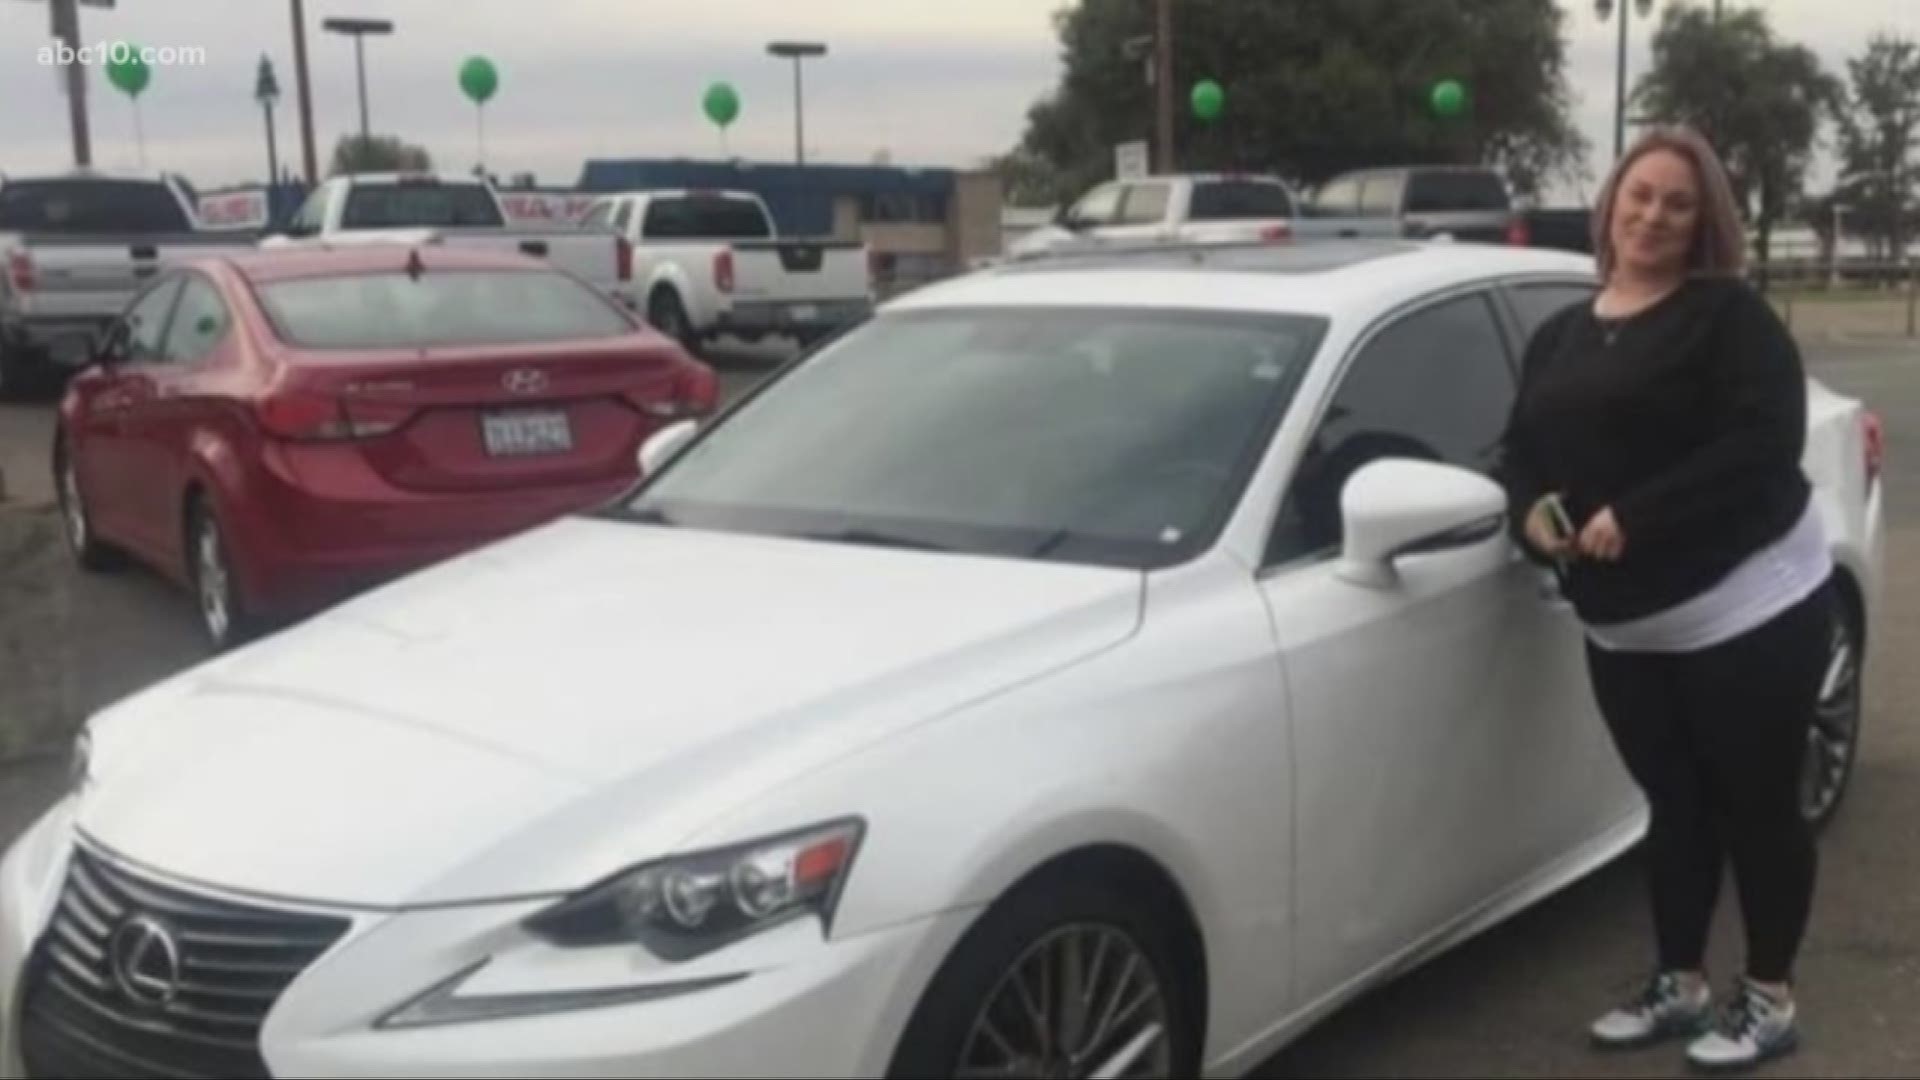 A woman went to a car dealership in Lodi and bought a Lexus with someone else's information.